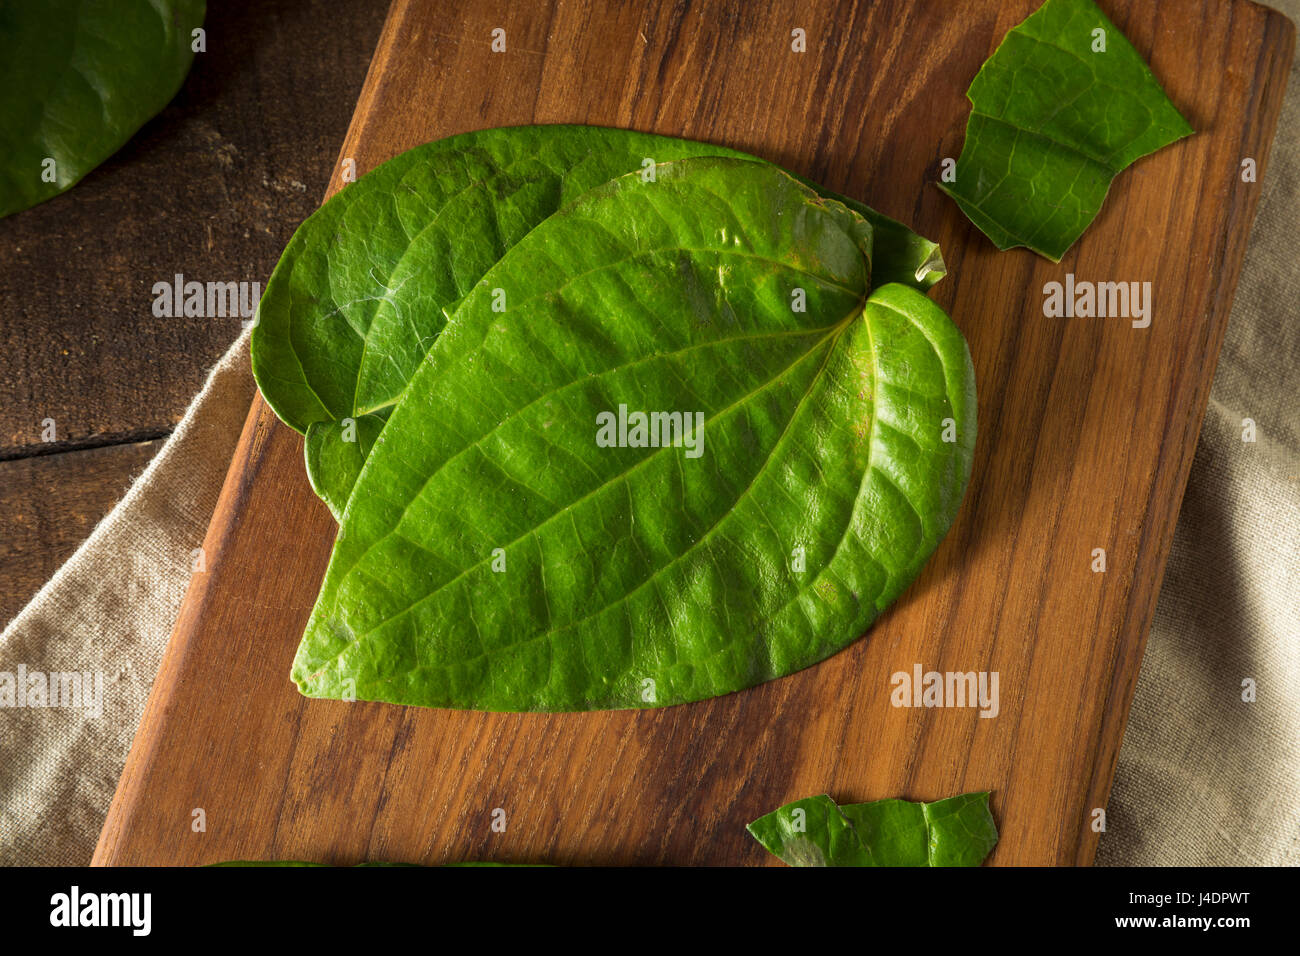 Raw Organic Green Pan Leaves Ready to Cook With Stock Photo